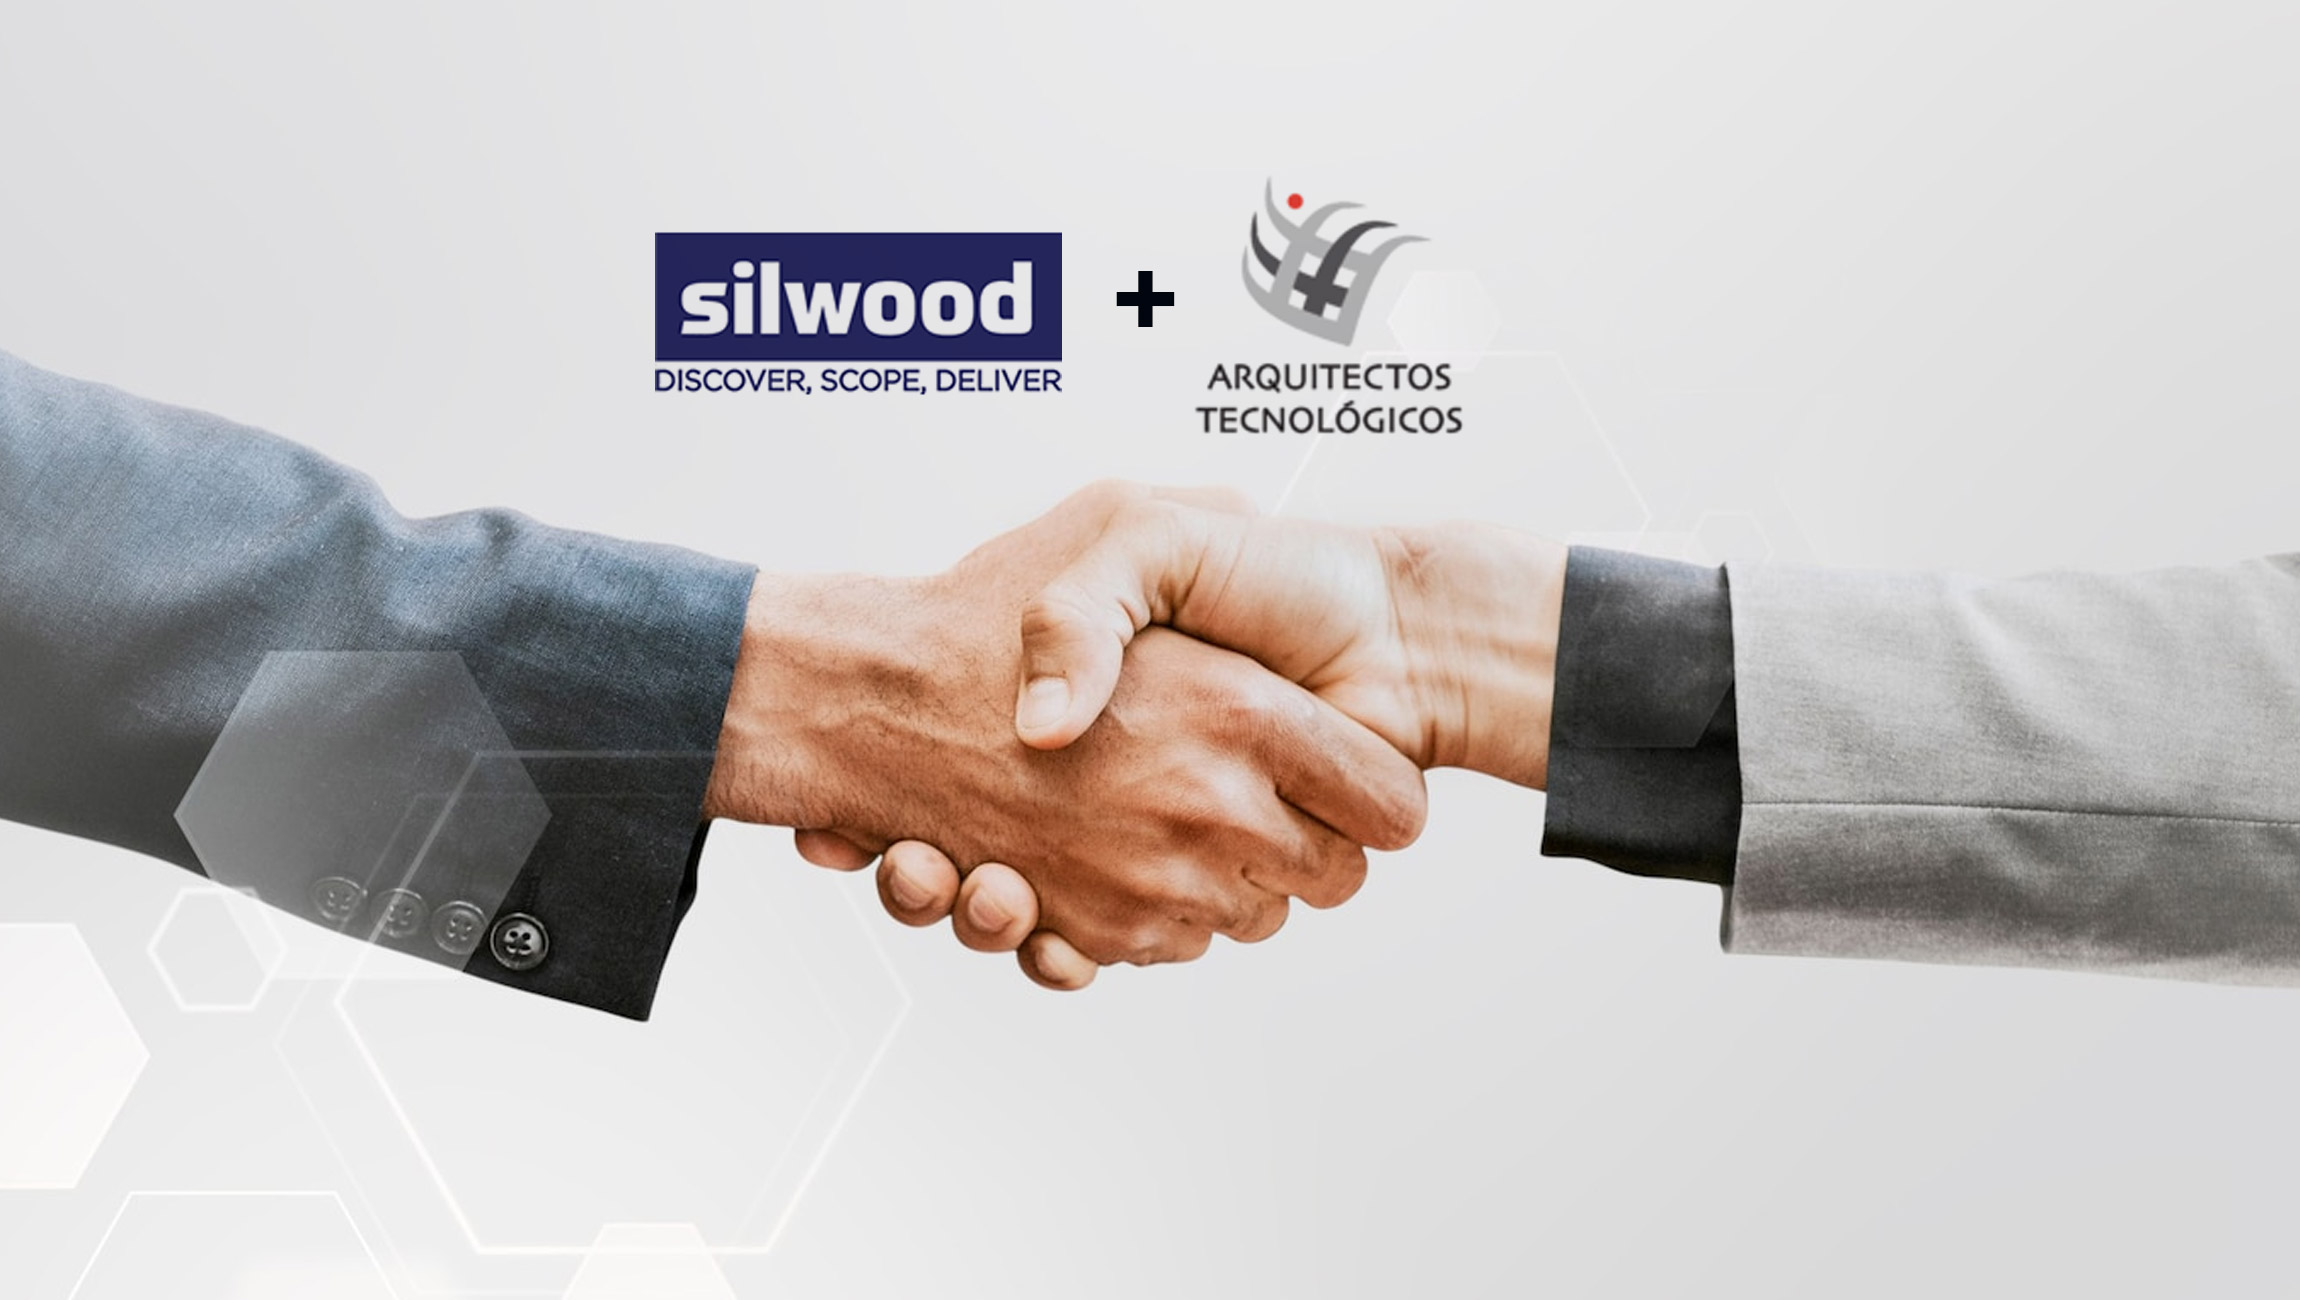 Silwood-Technology-and-Arquitectos-Tecnologicos-partner-to-accelerate-successful-ERP-data-transformation-initiatives